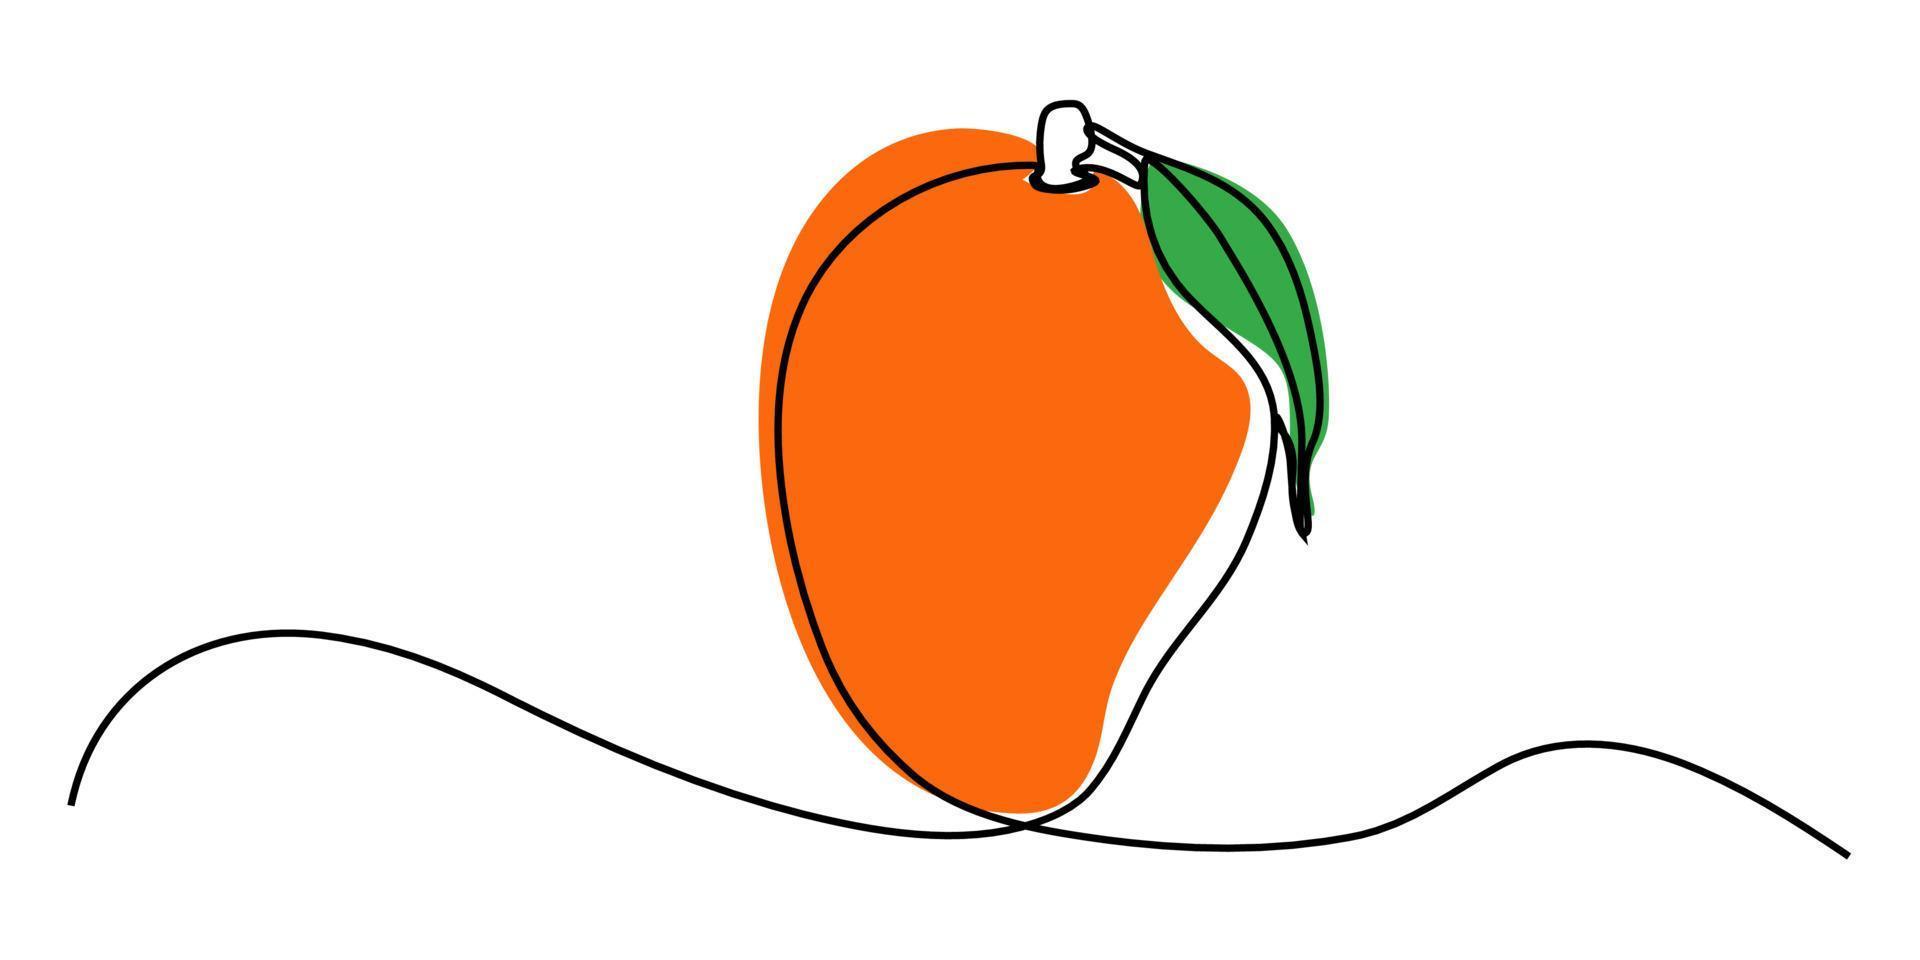 Mango vector illustration. One line drawing art color illustration with lettering organic mango.